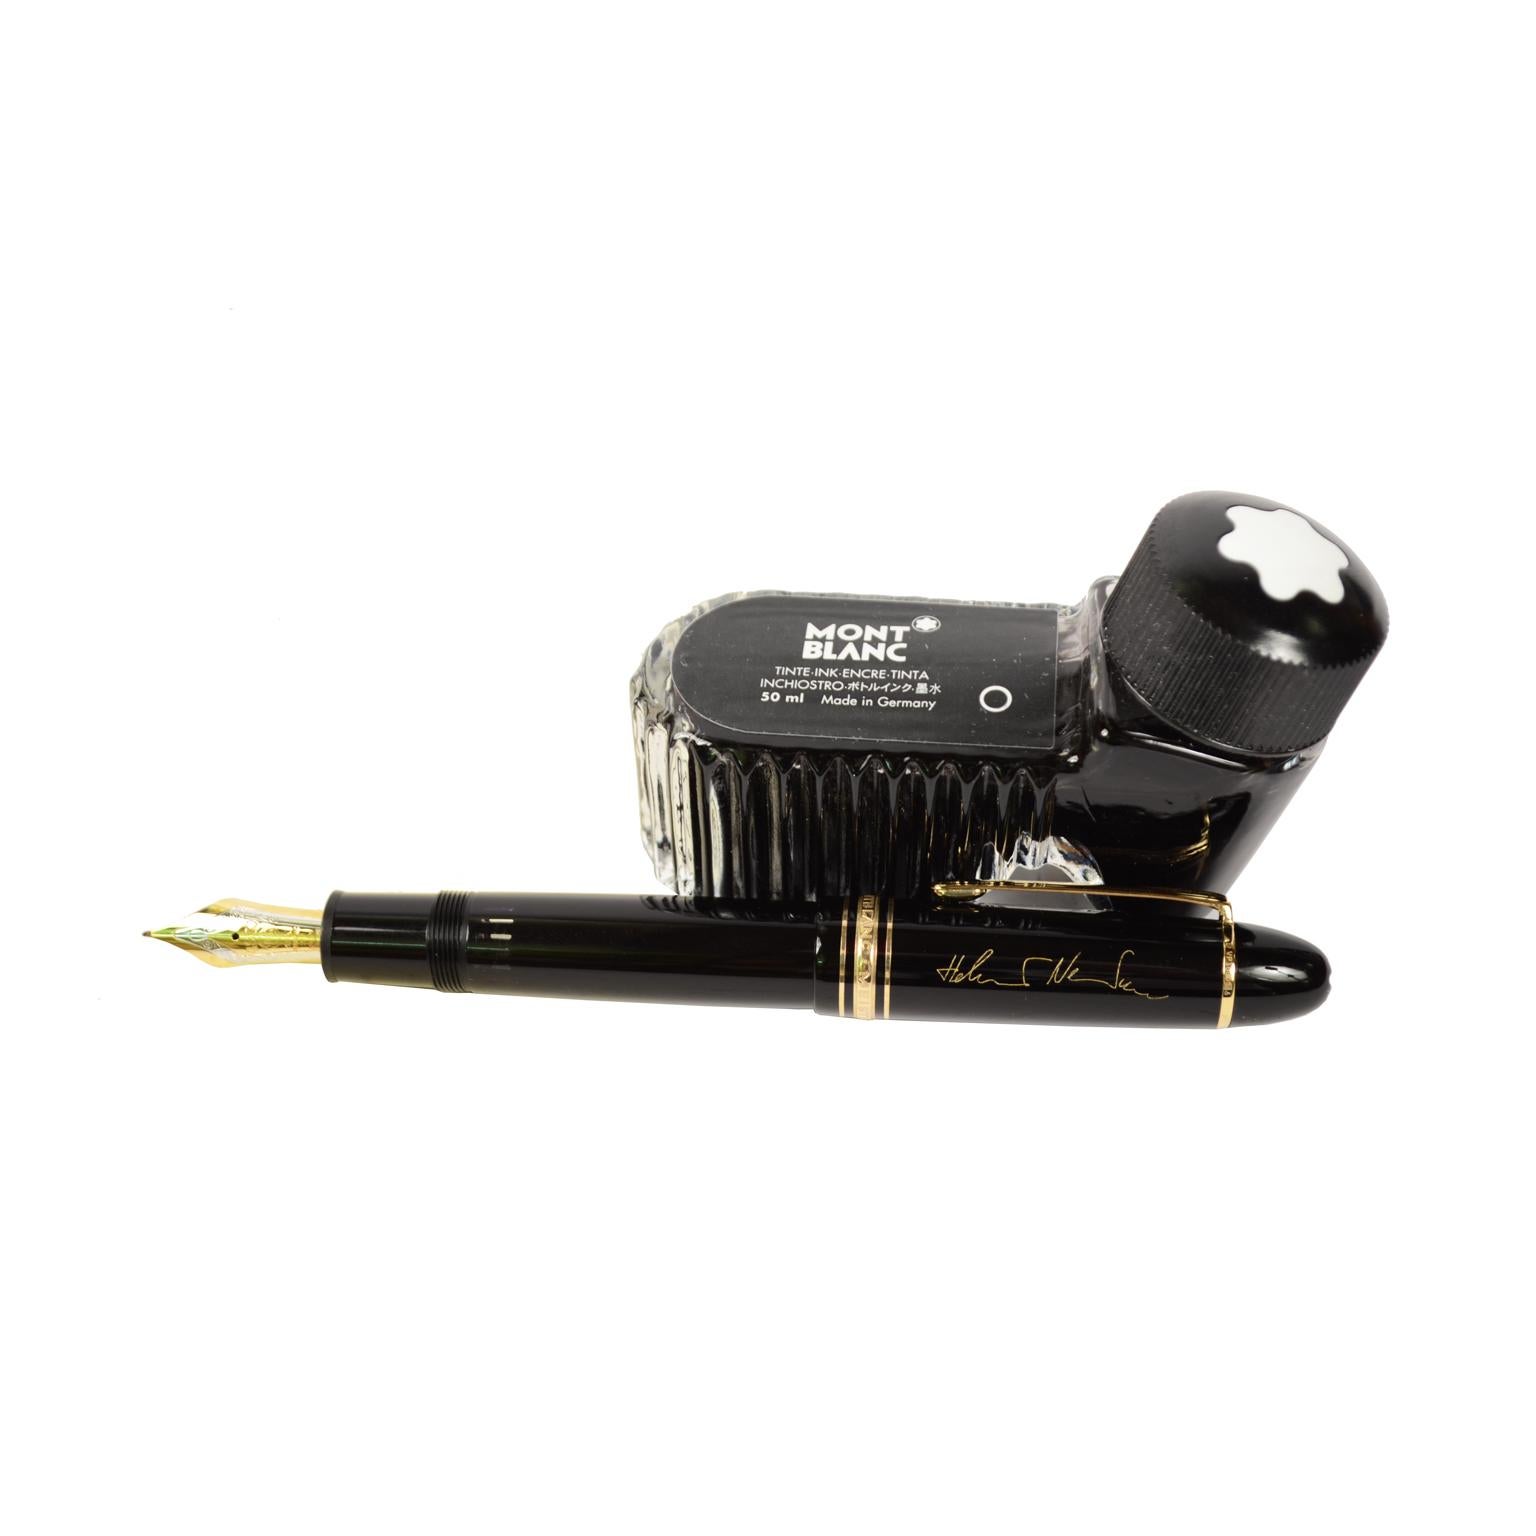 Mm Mont Blanc Meisterstuck 149 Signed by Helmut Newton 5